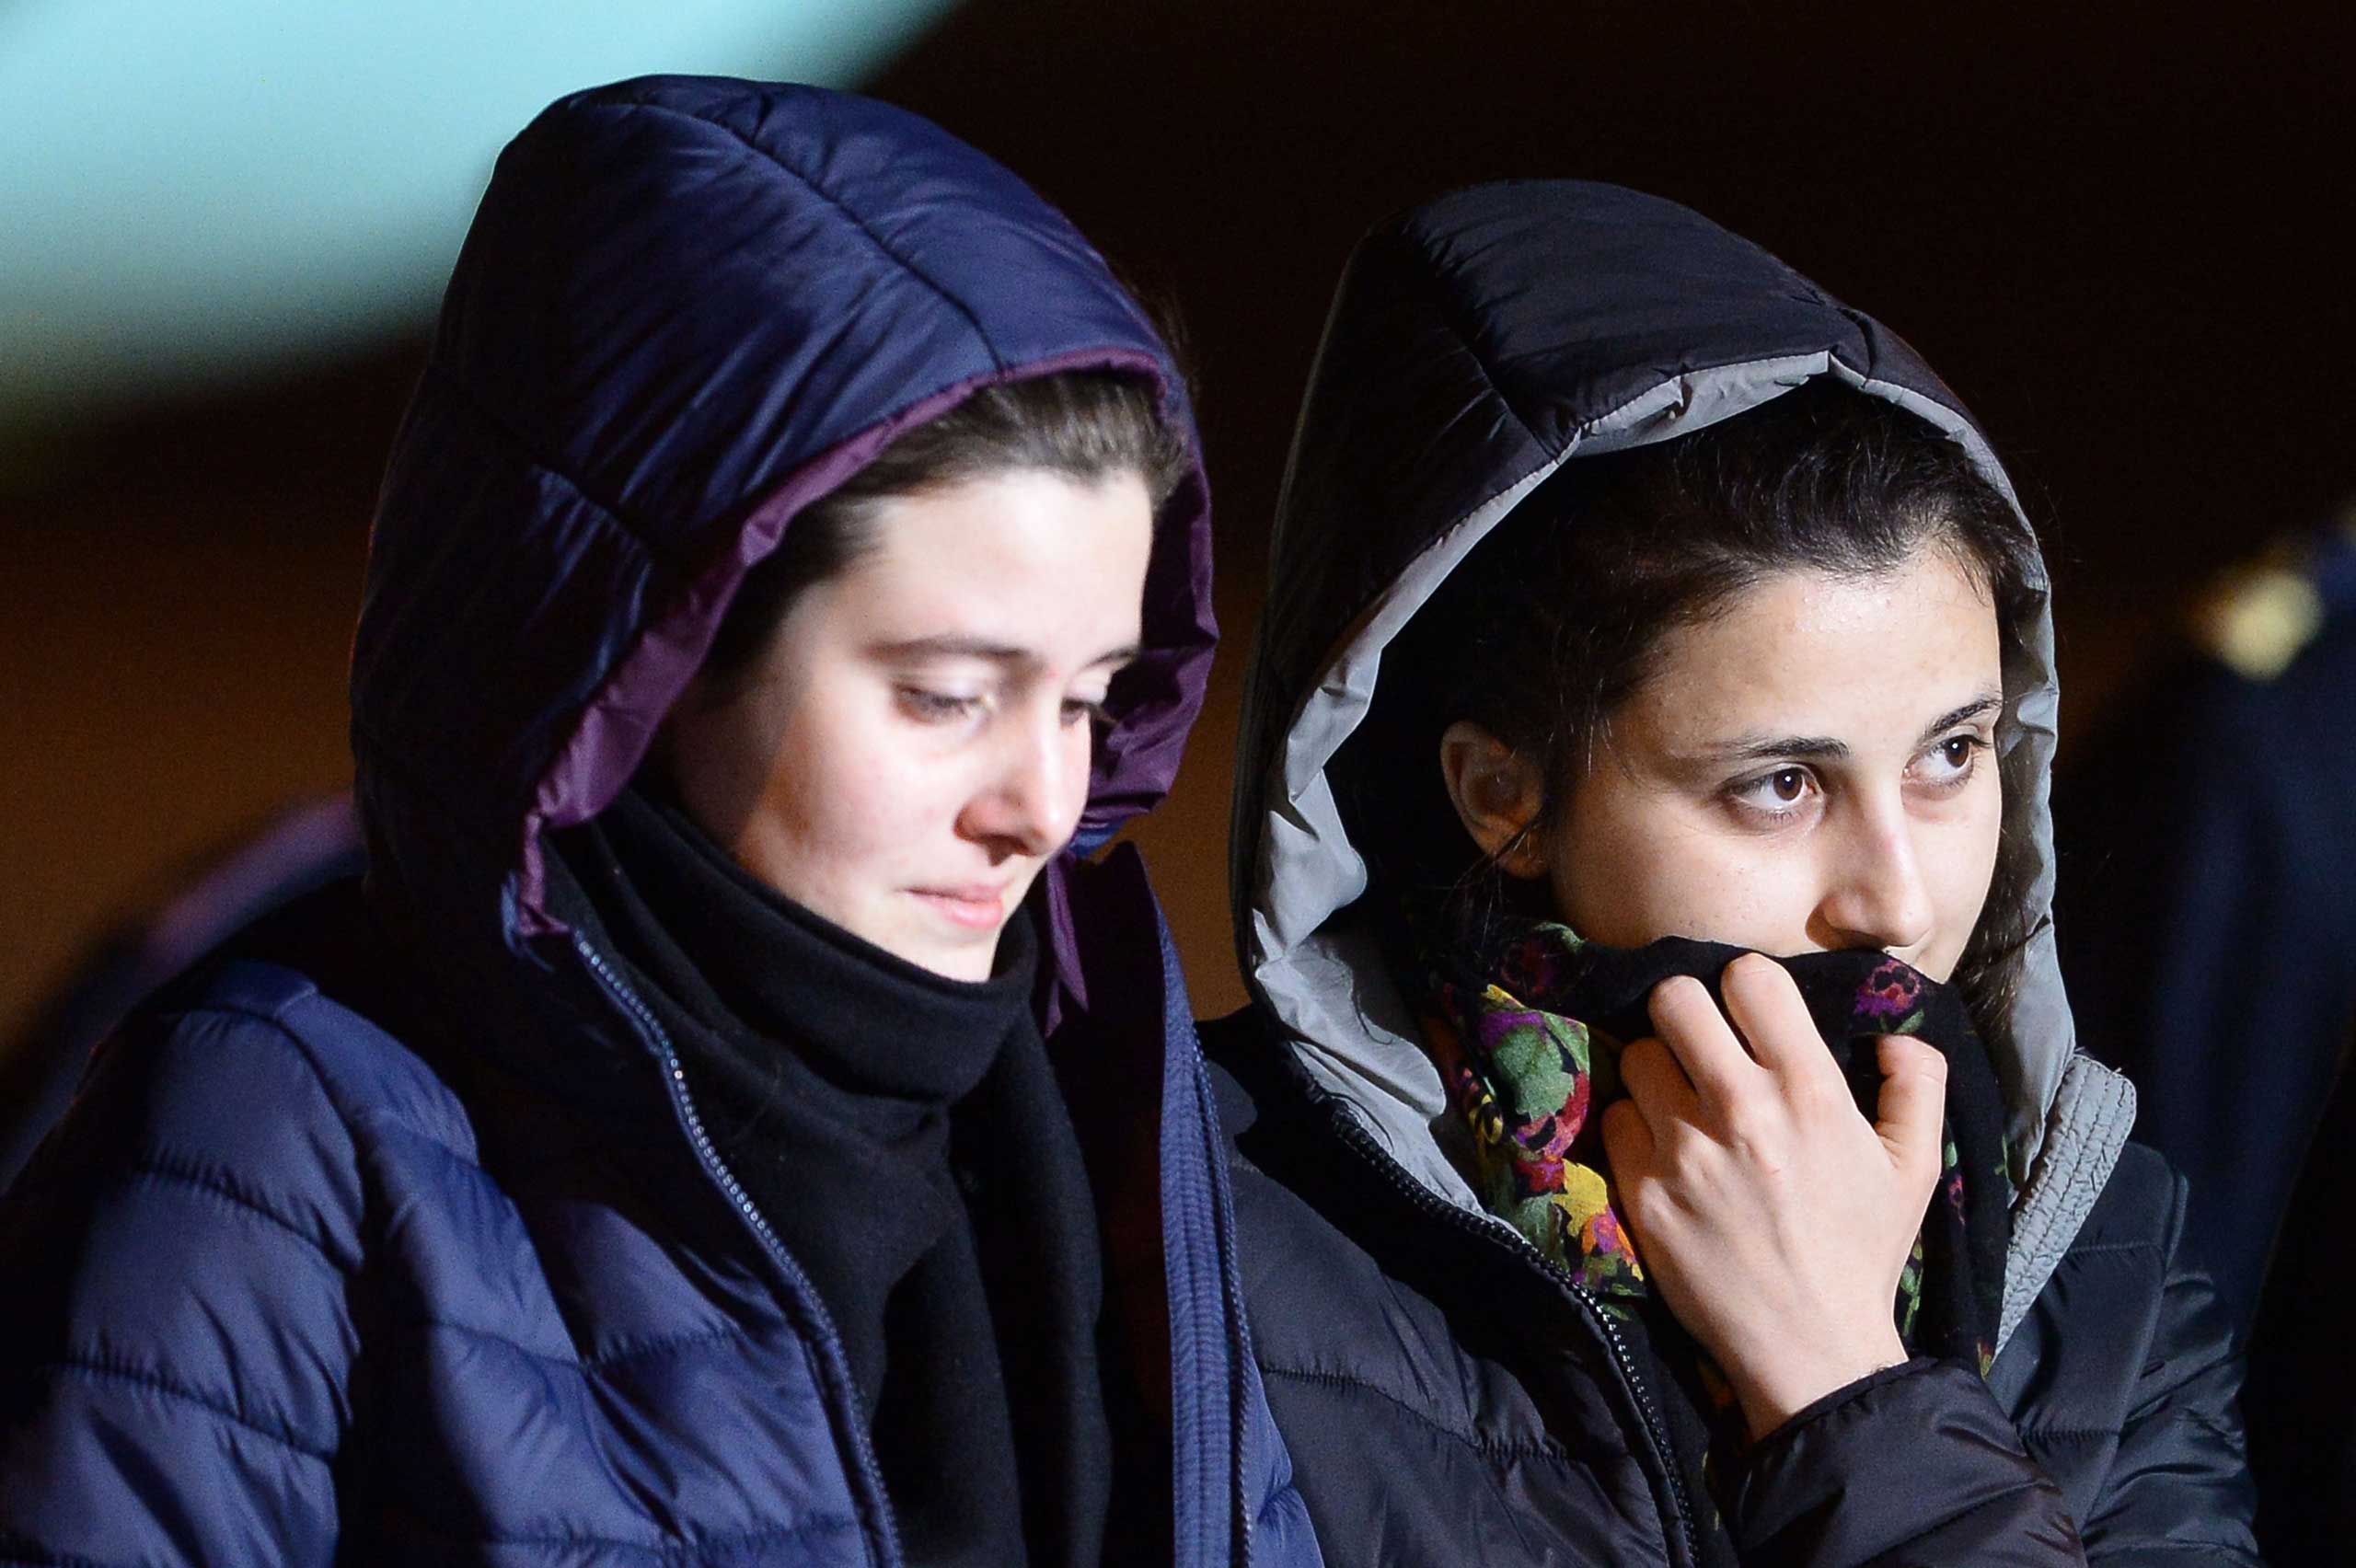 Italian aid workers abducted in Syria last summer, Greta Ramelli (L) and Vanessa Marzullo arrive at Ciampino airport in Rome early on Jan. 16, 2015. (Filippo Monteforte—AFP/Getty Images)